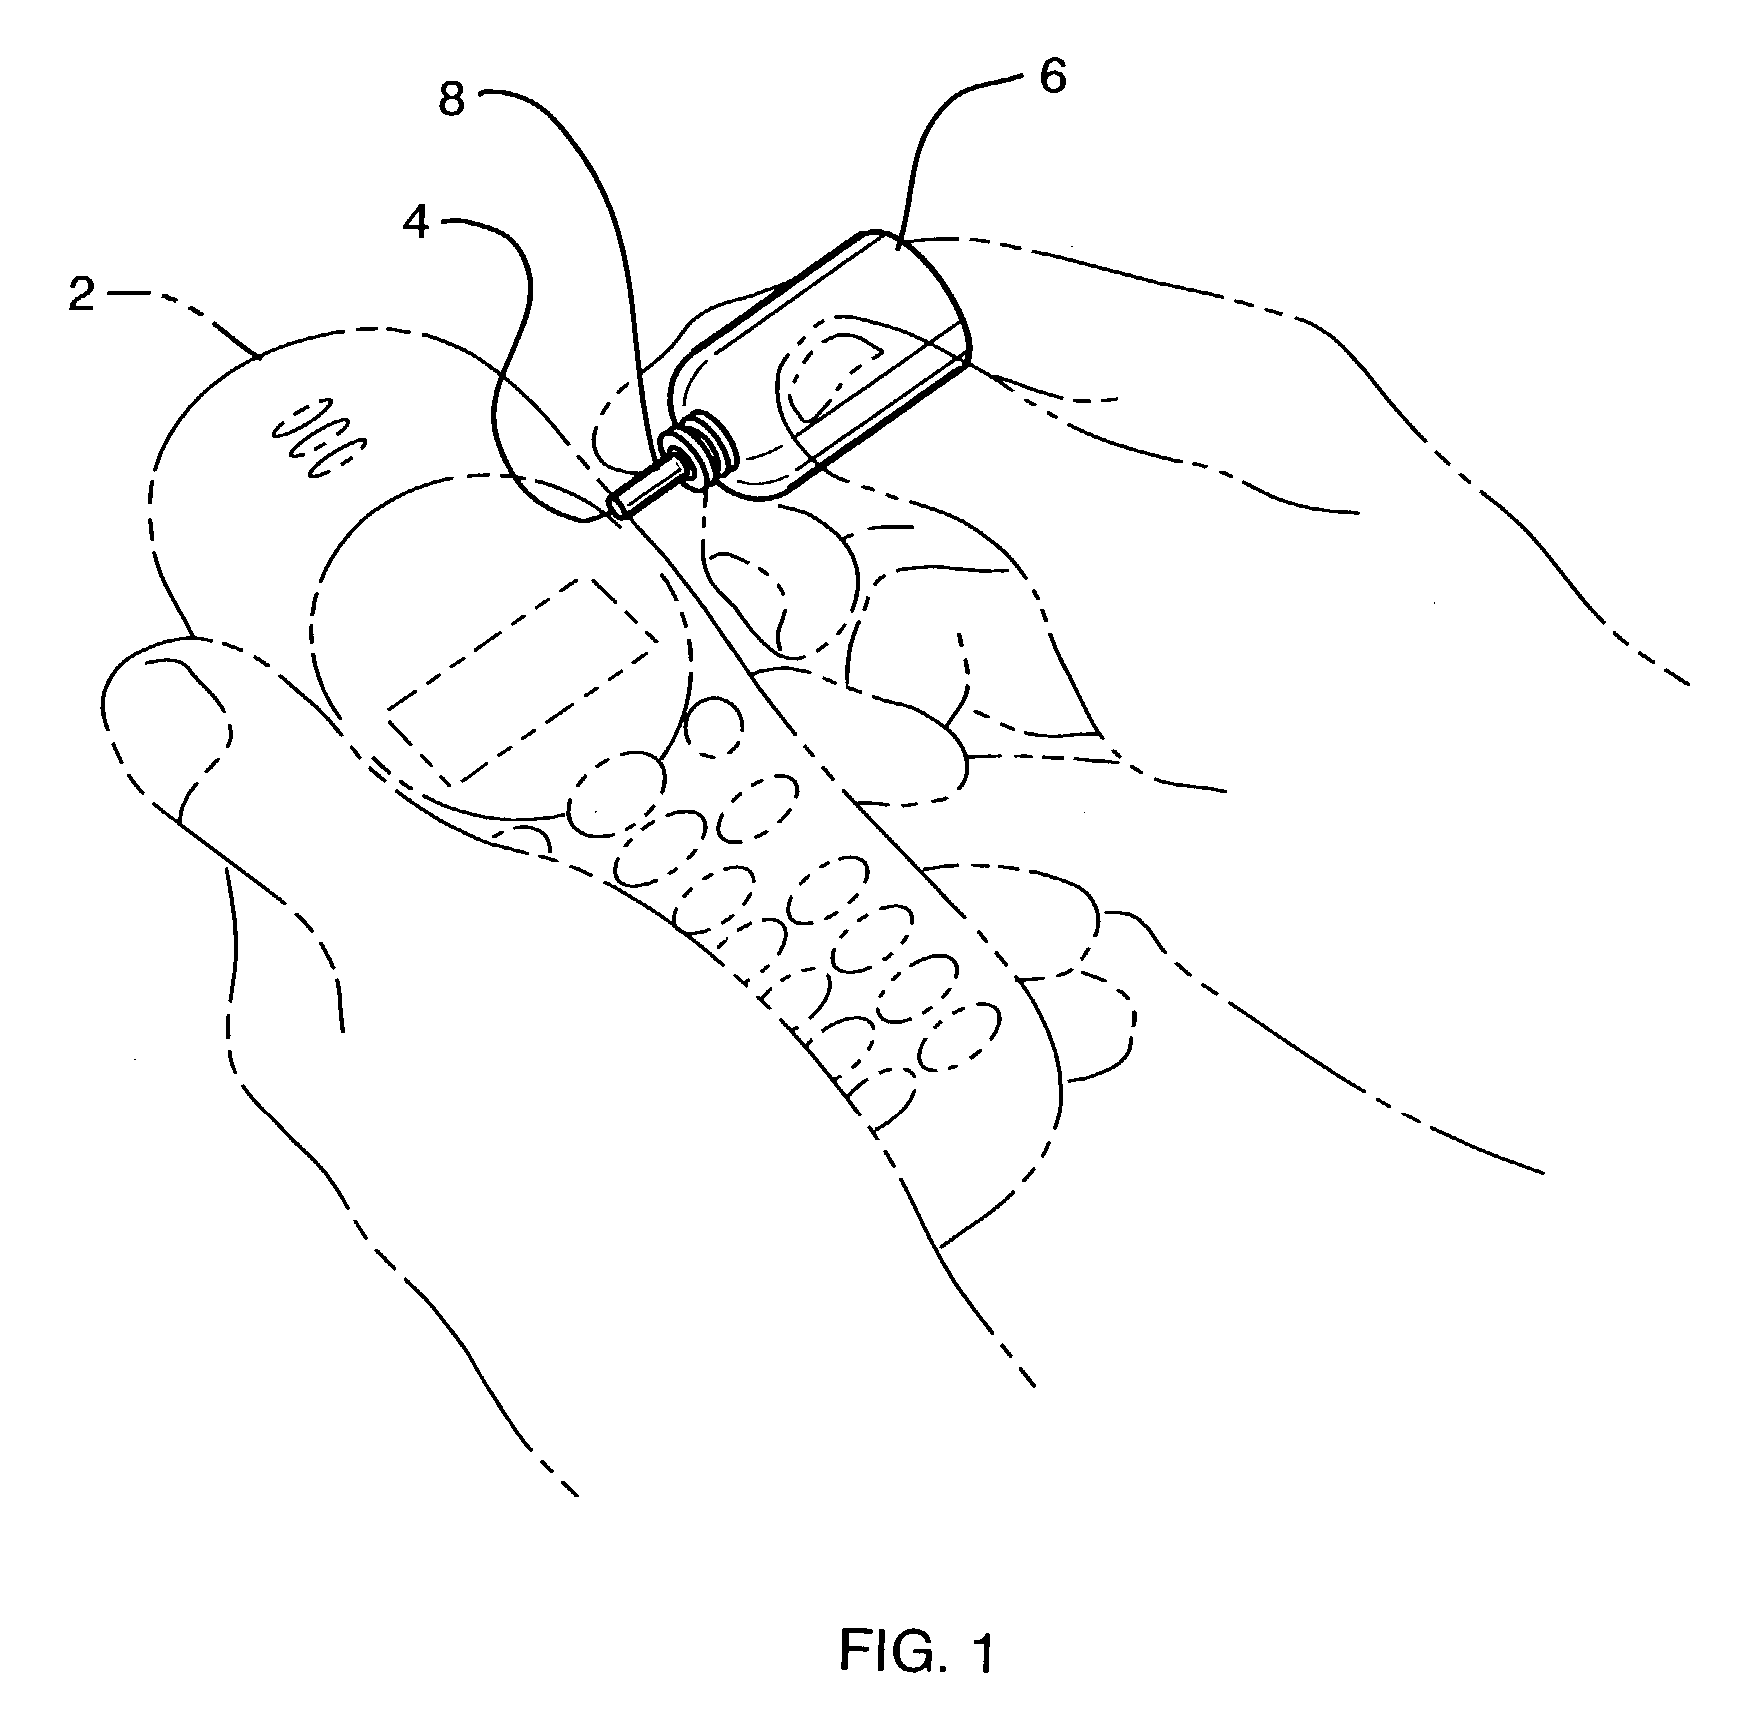 Apparatus for refueling a direct oxidation fuel cell